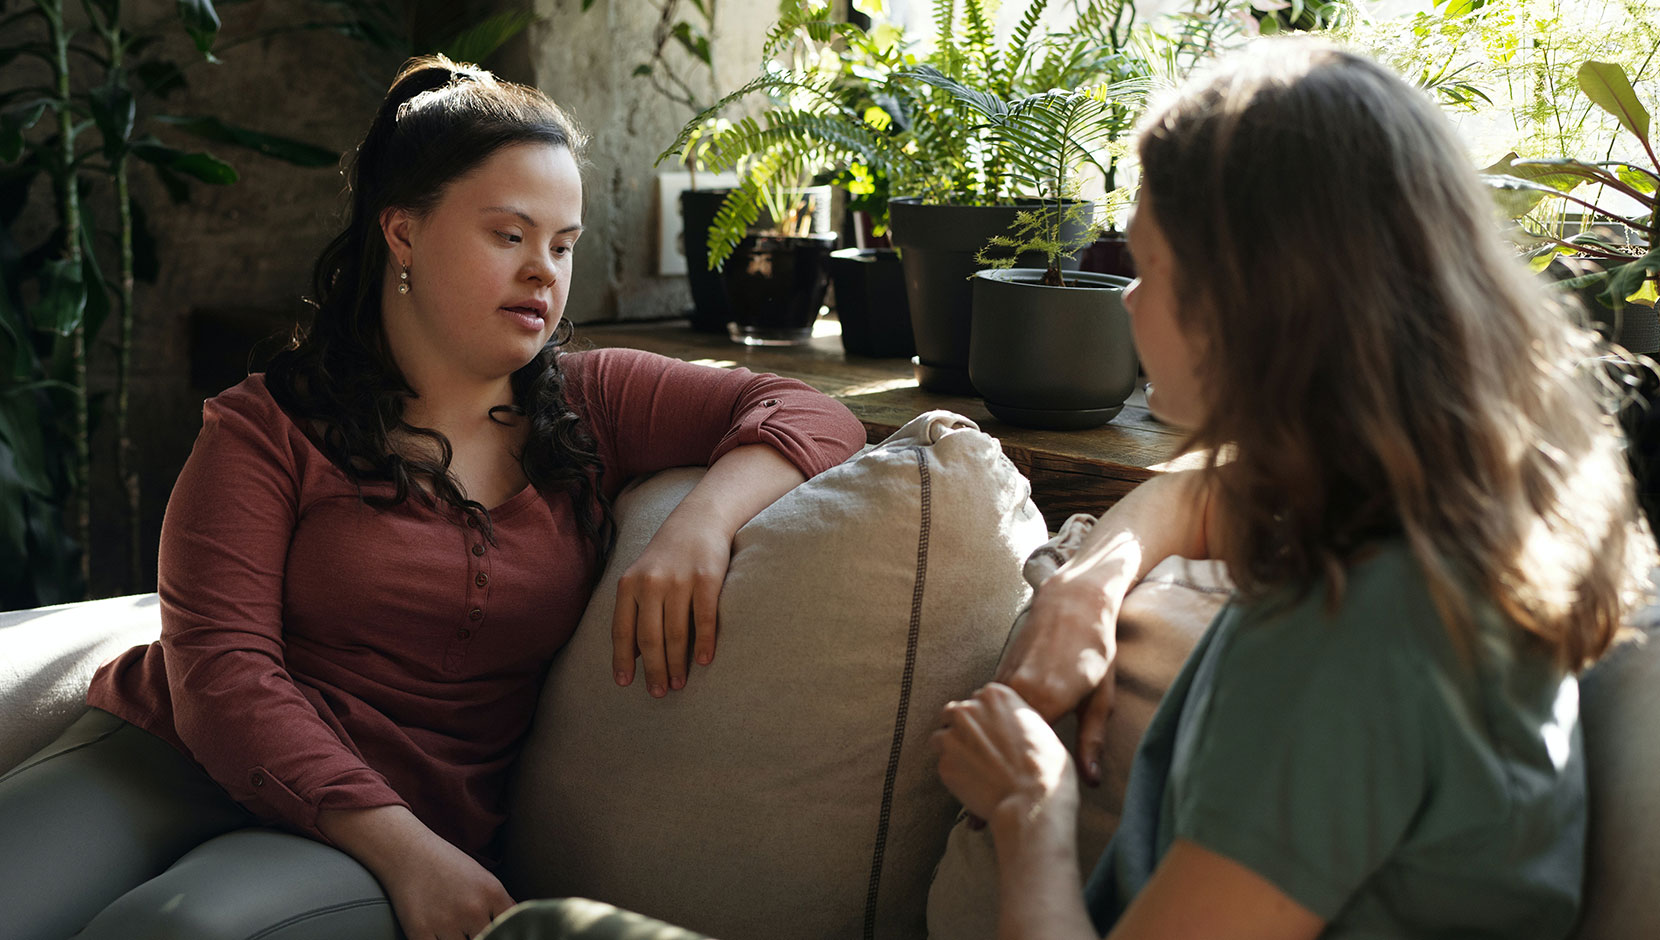 Two women seated on a couch in conversation. The one on the left has Down syndrome.